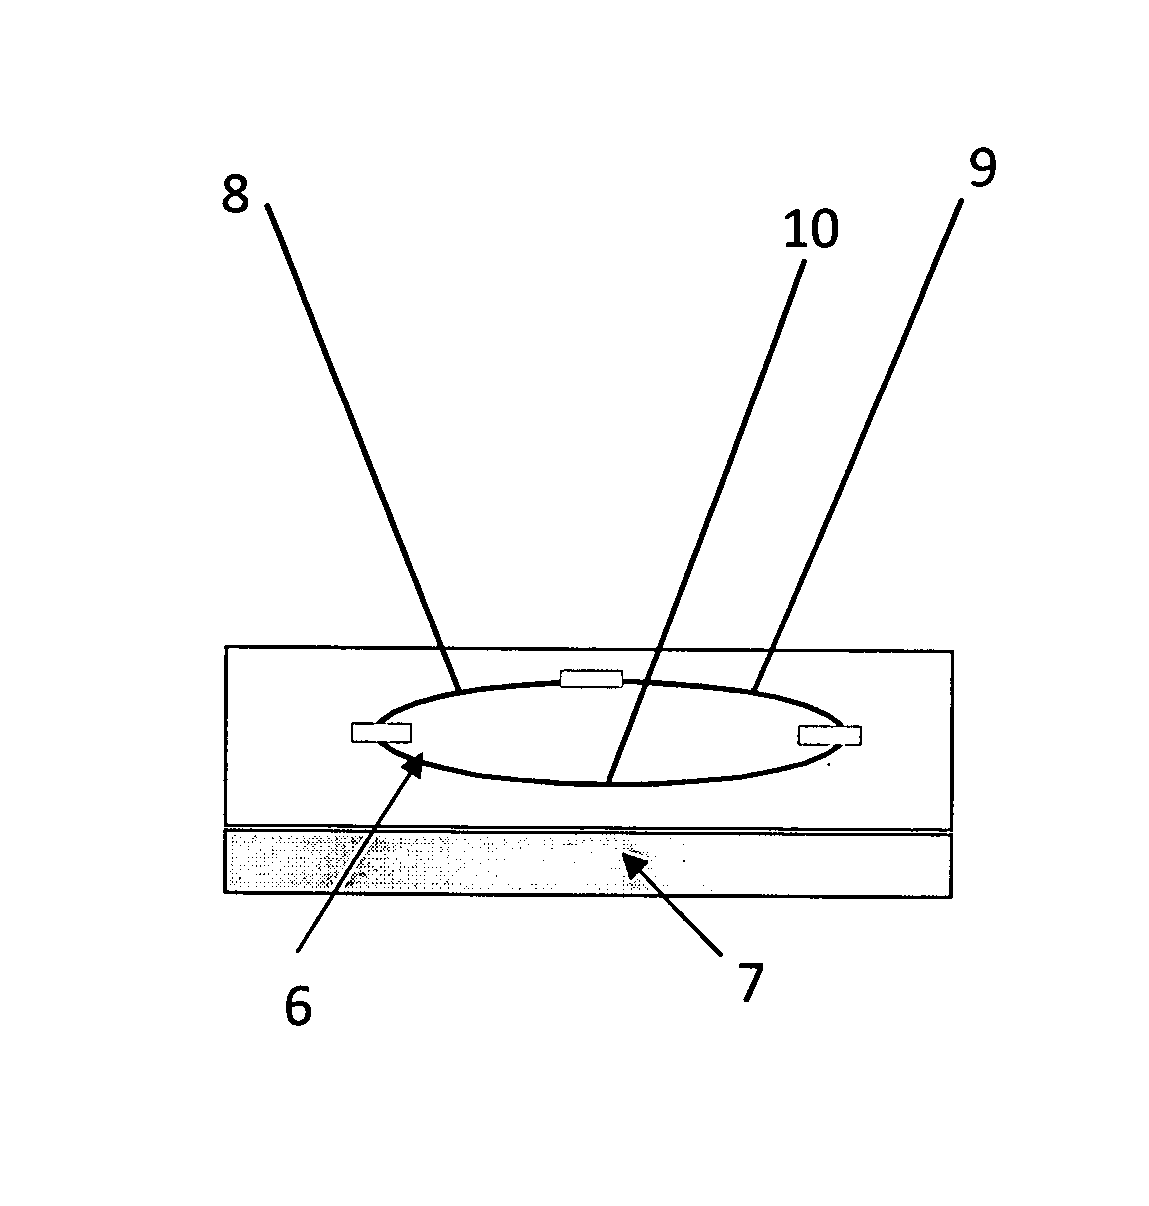 Rotation-sensitive semiconductor ring laser device using the nonlinear sagnac effect